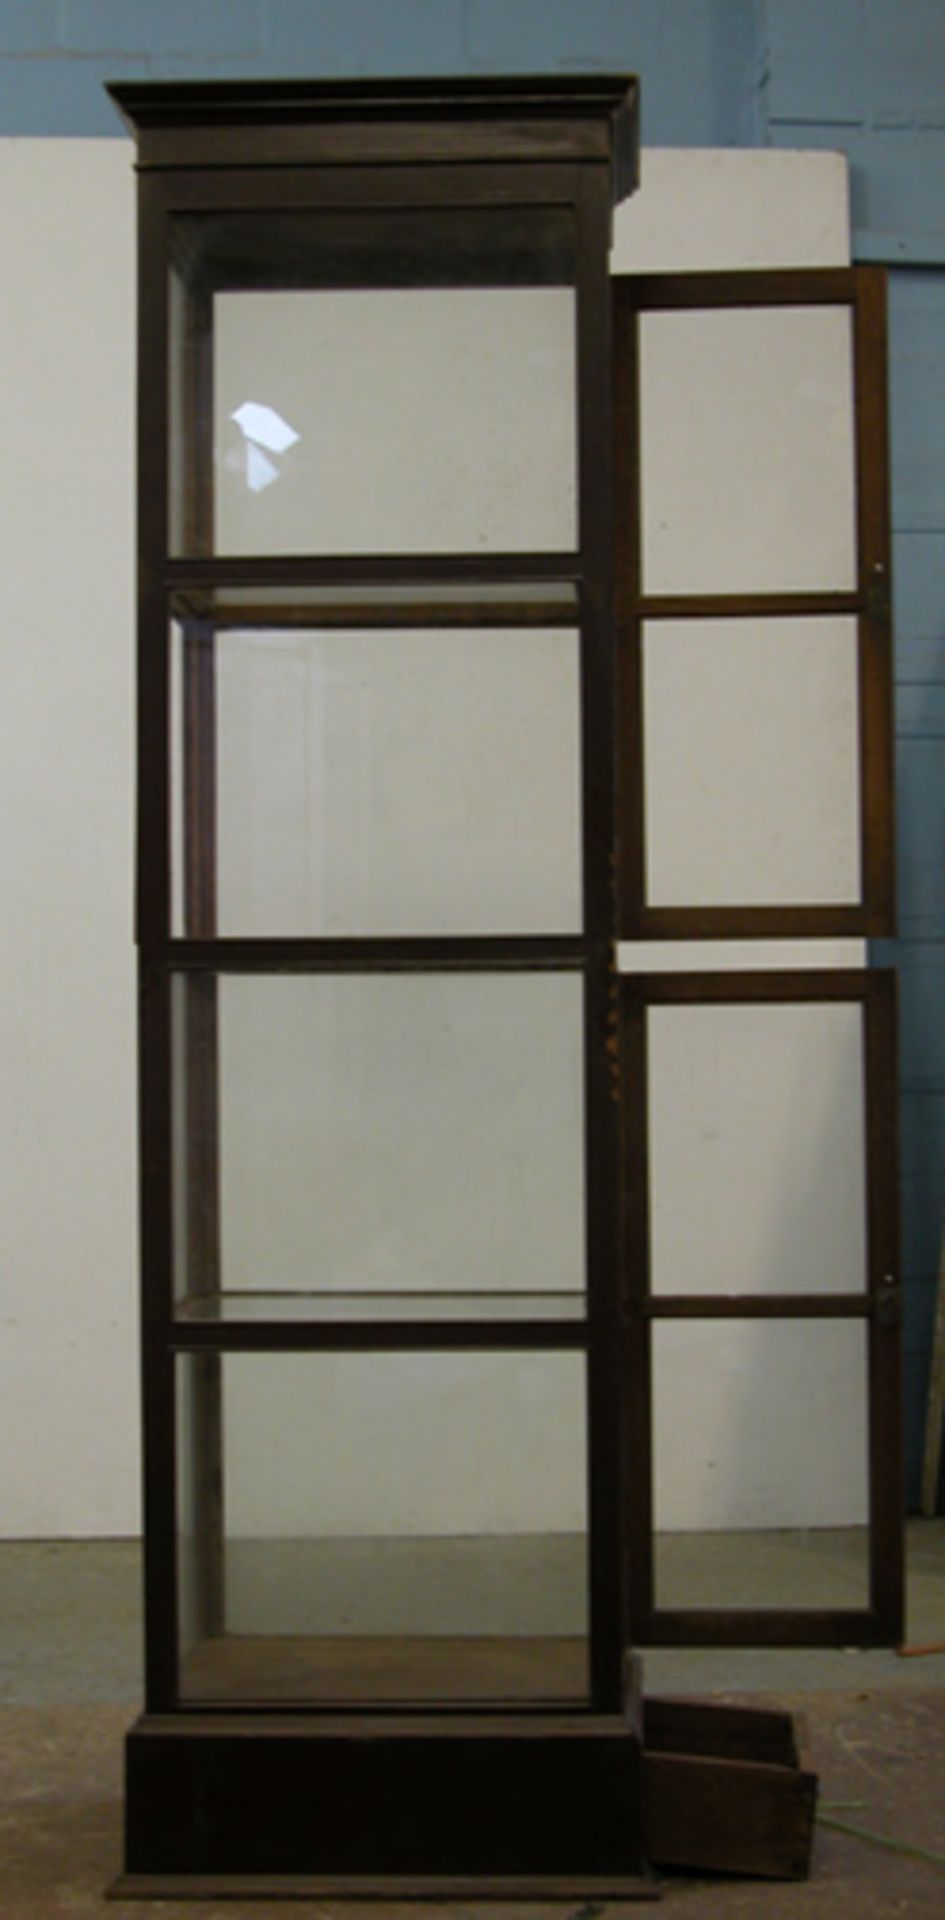 ANTIQUE TEAK SHOWCASE, LATE VICTORIAN. HEIGHT 2285MM (90IN) X WIDTH 545MM (21.25IN) X CORNICE DEPTH - Image 3 of 6